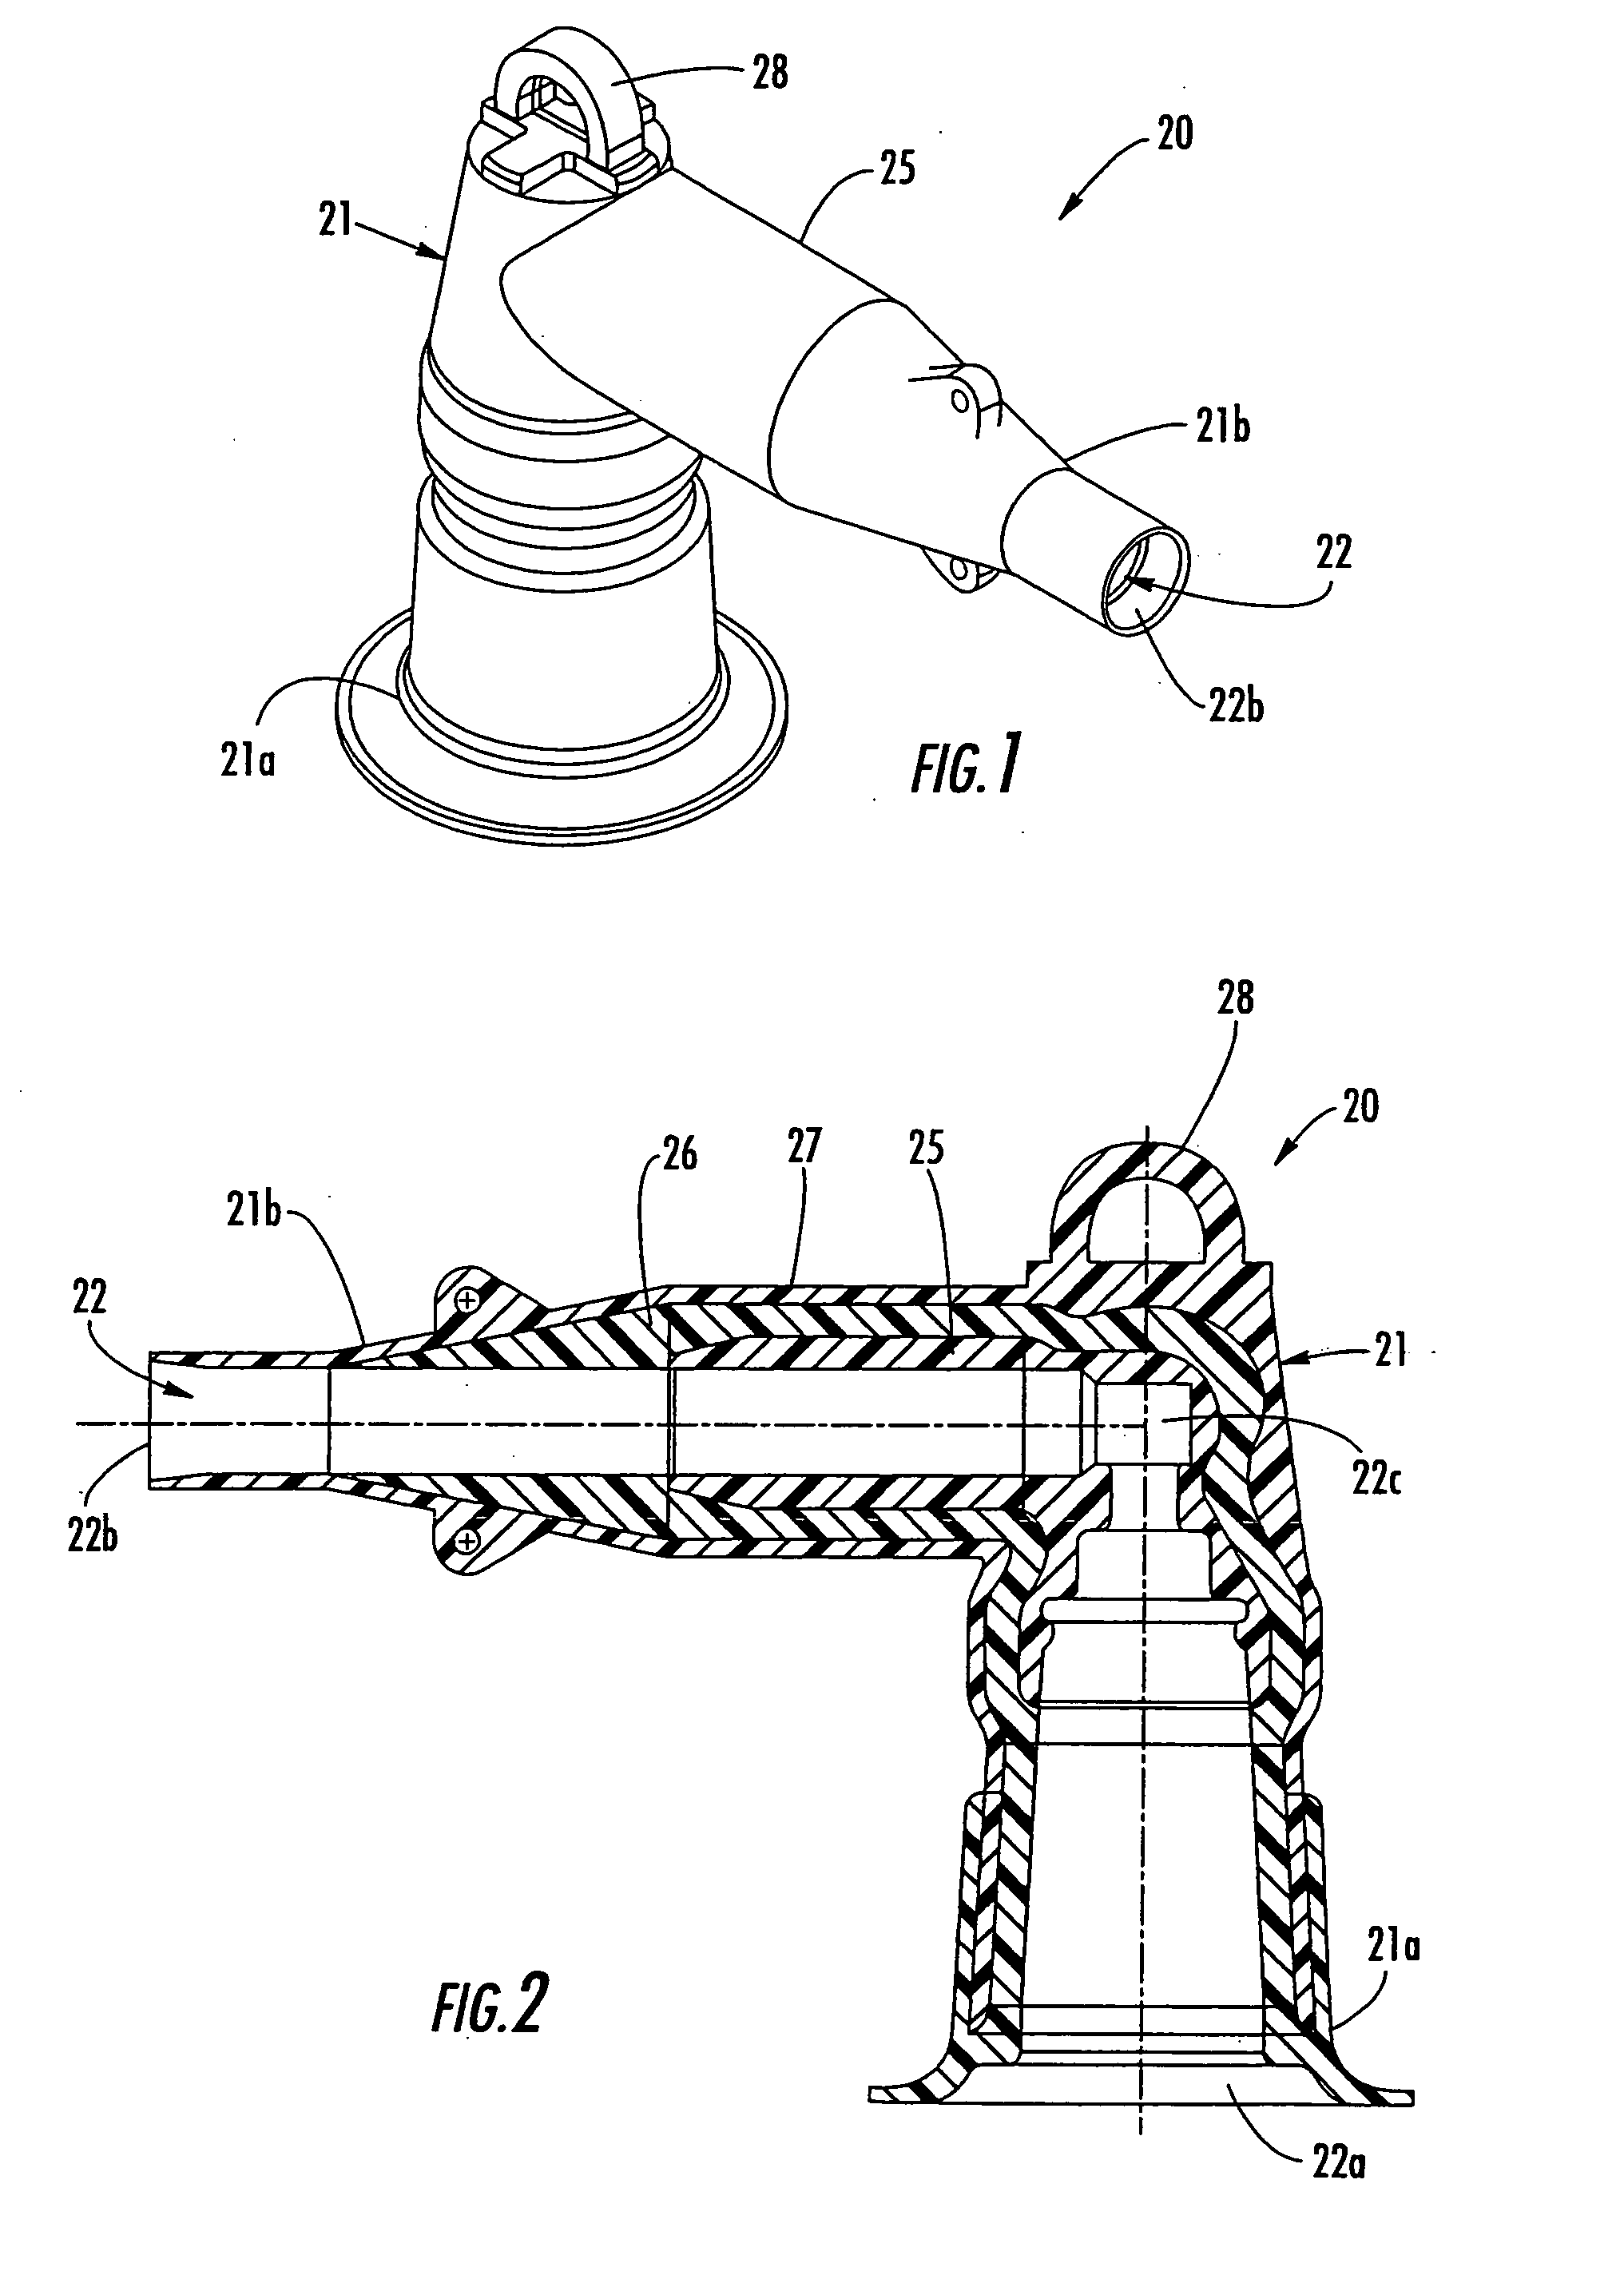 Electrical connector including silicone elastomeric material and associated methods